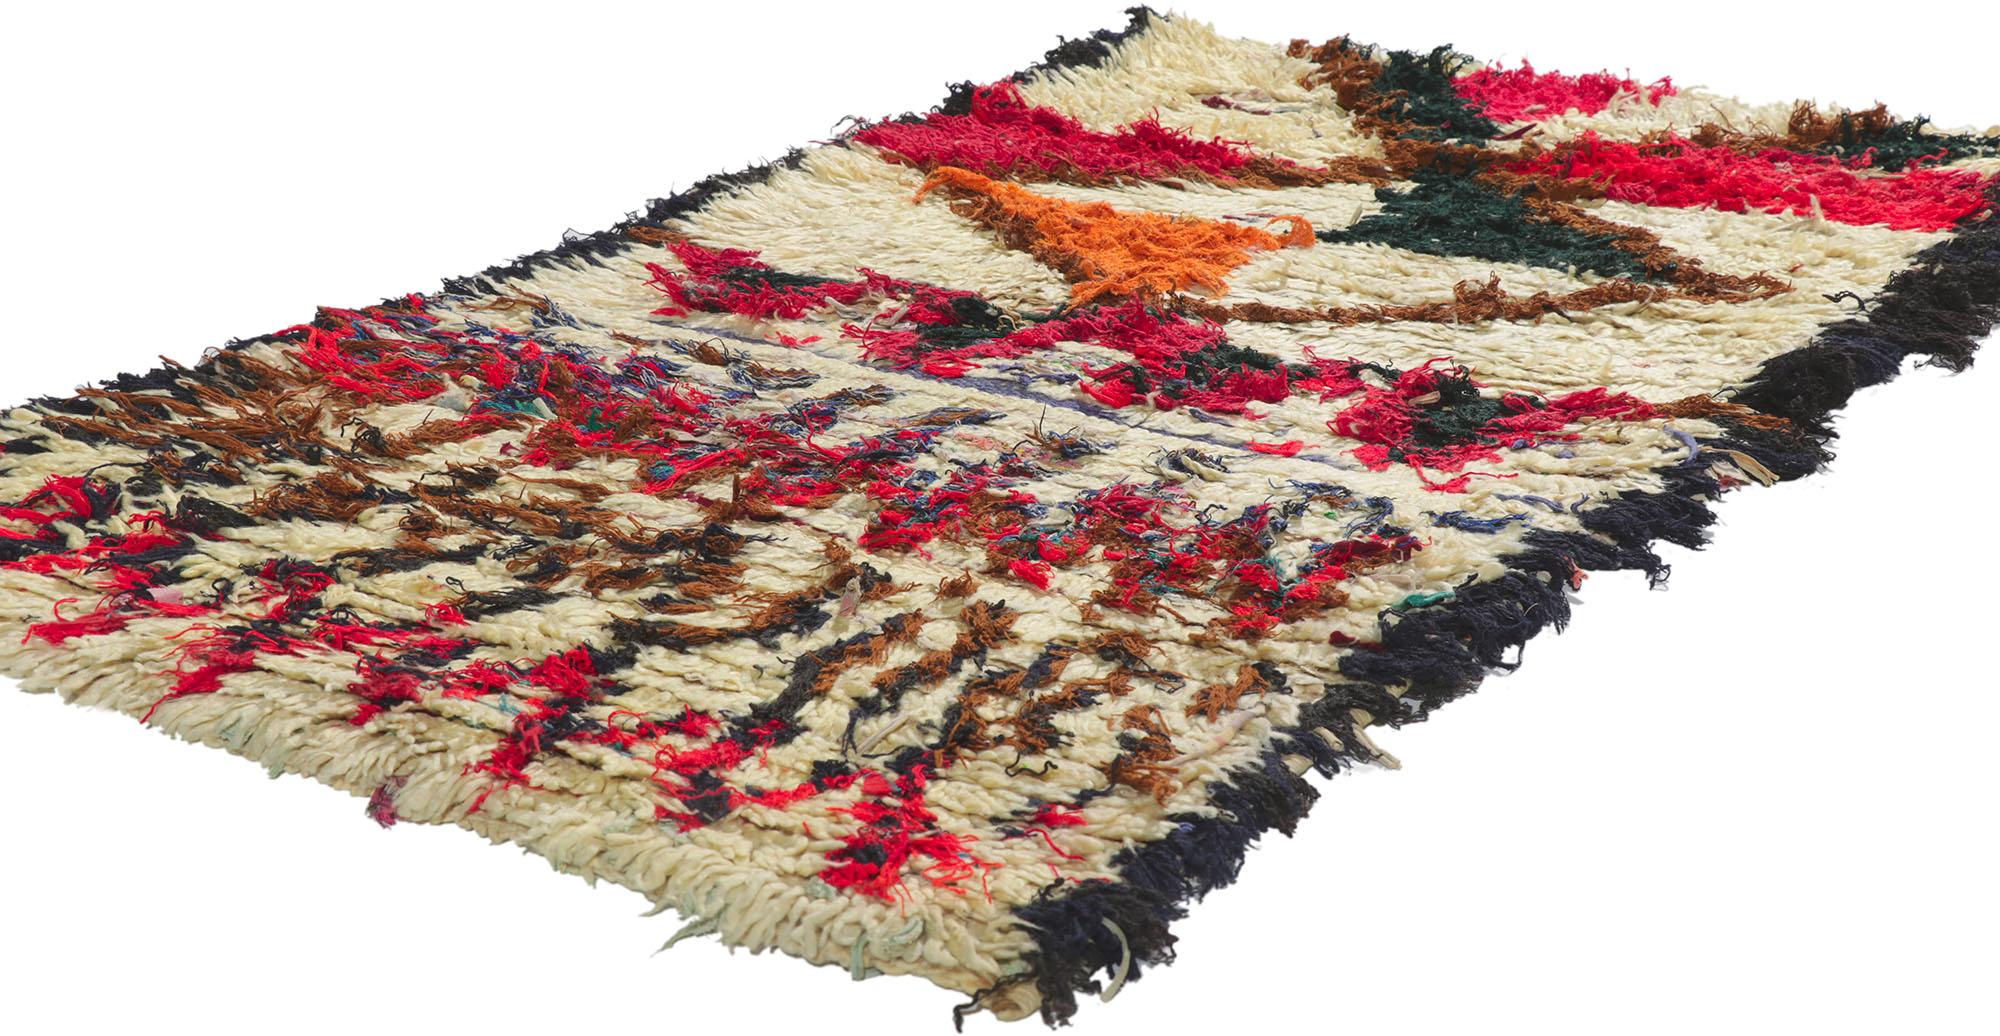 21626 Vintage Berber Moroccan Boucherouite Rag rug 03'00 x 05'09. With its expressive tribal design, incredible detail and texture, this hand knotted vintage Berber Moroccan Boucherouite rug is a captivating vision of woven beauty. The abrashed